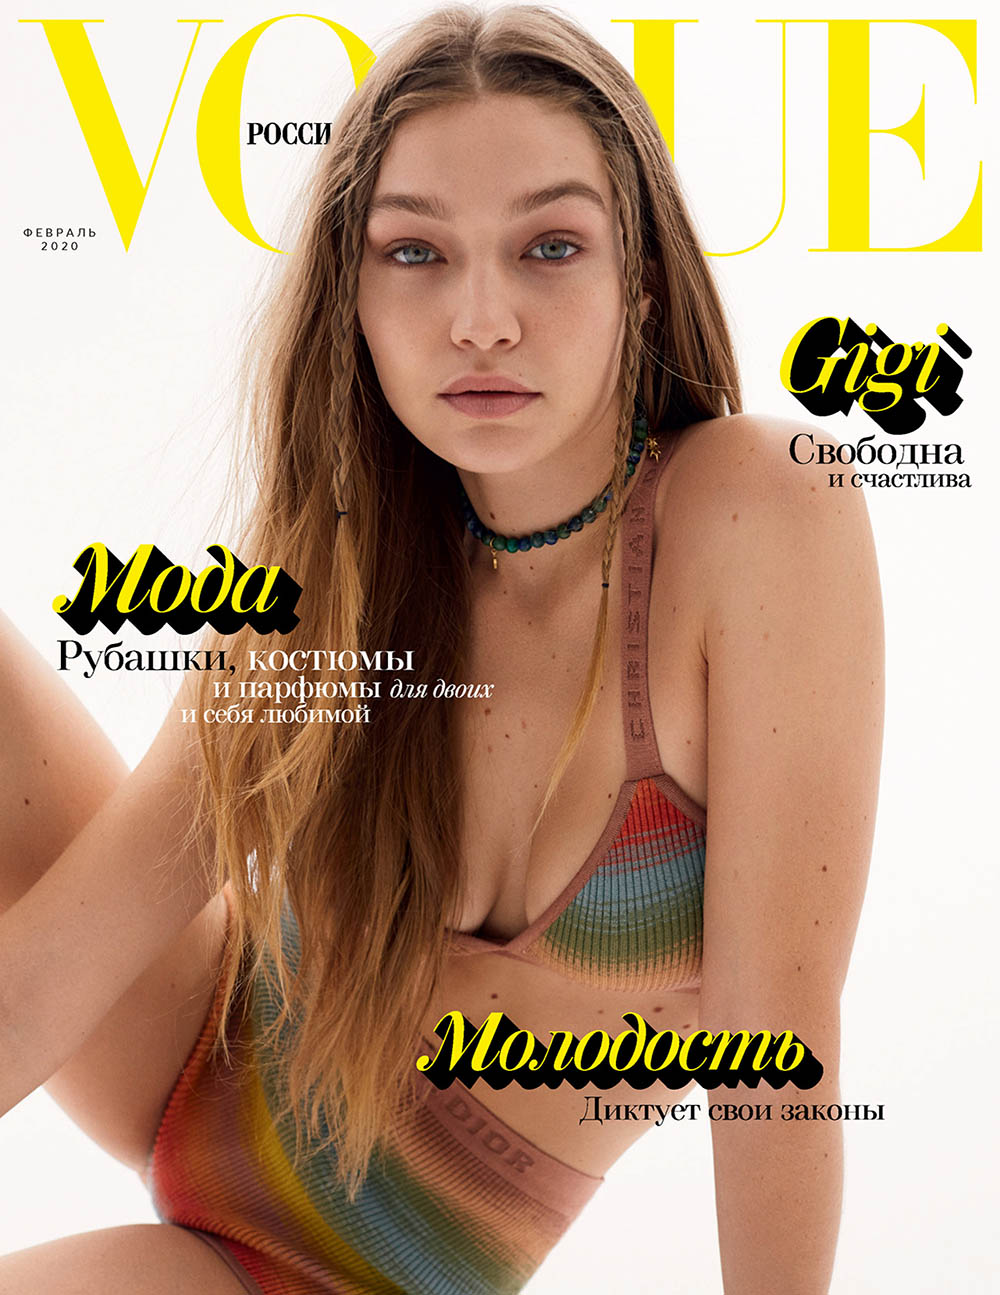 Gigi Hadid covers Vogue Russia February 2020 by Zoey Grossman